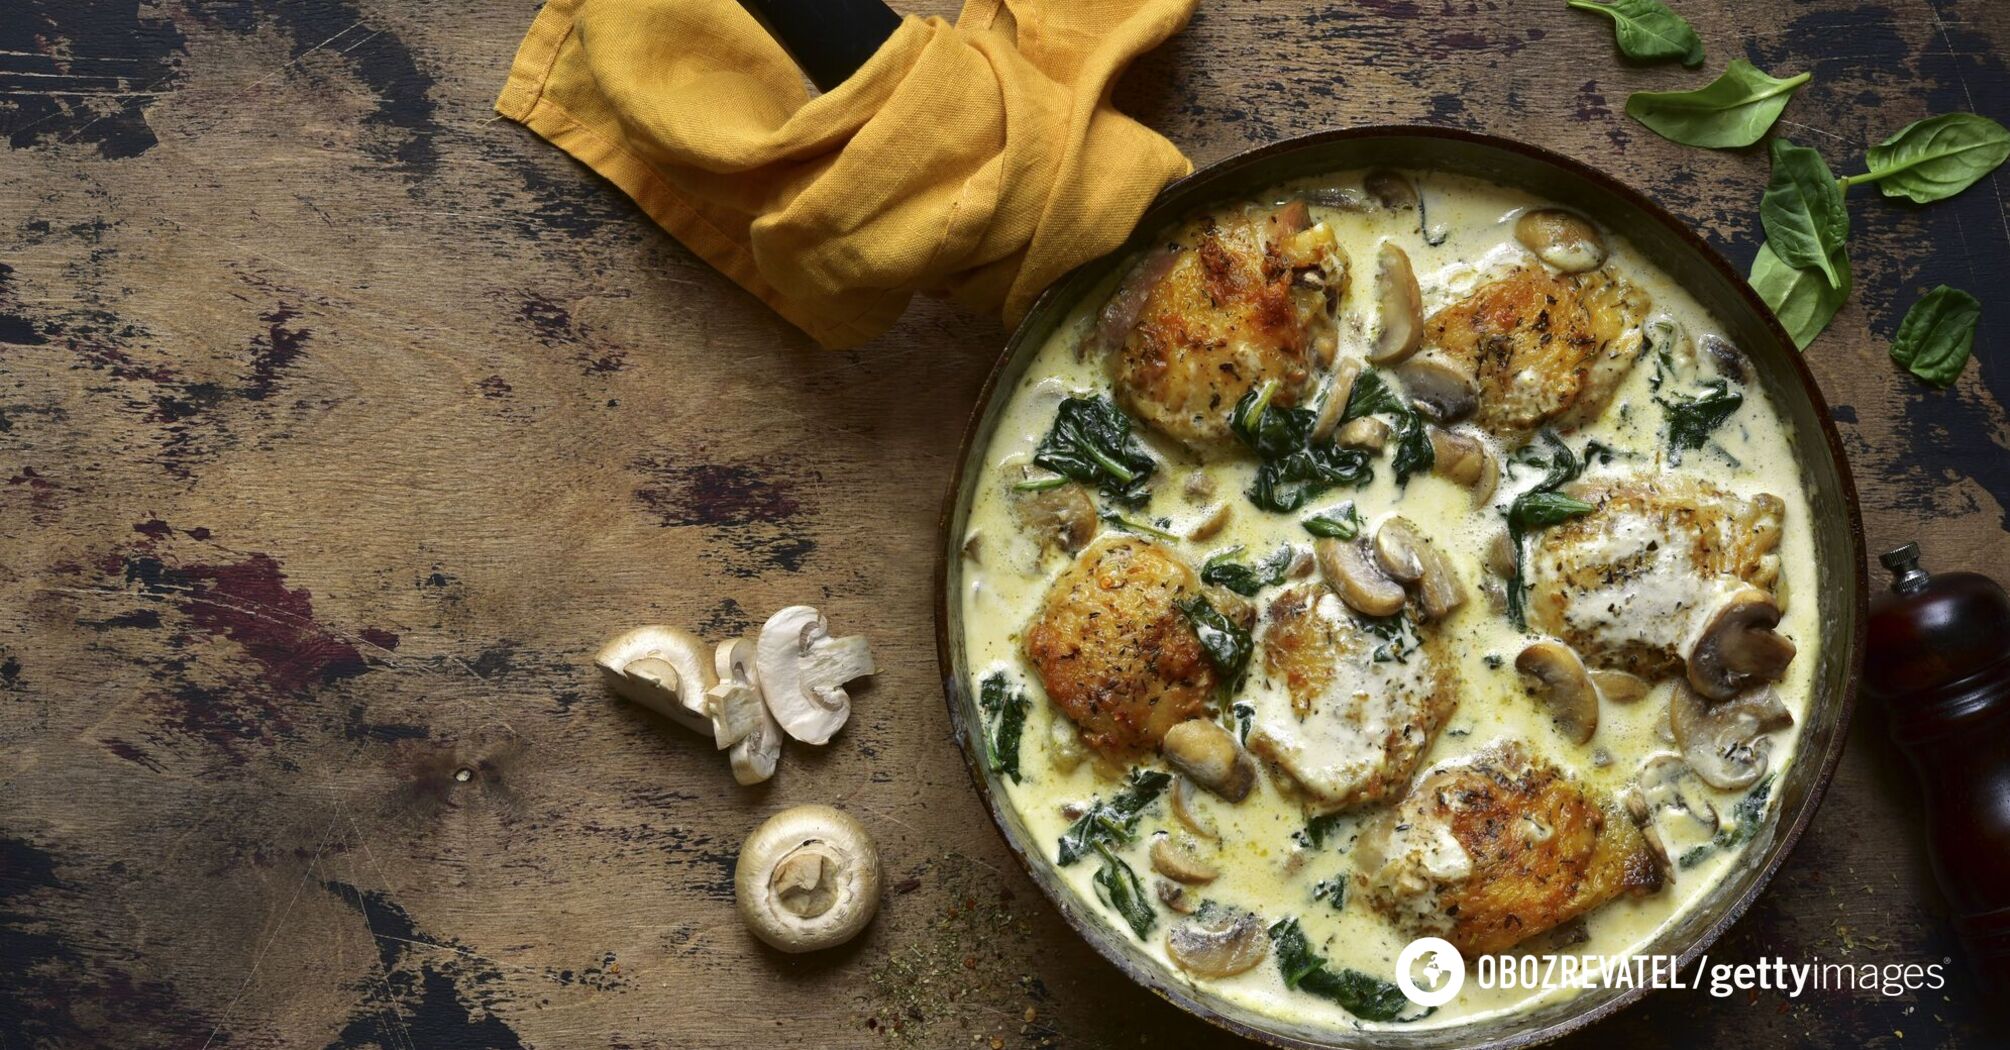 Turkey fillet in a creamy sauce with mushrooms